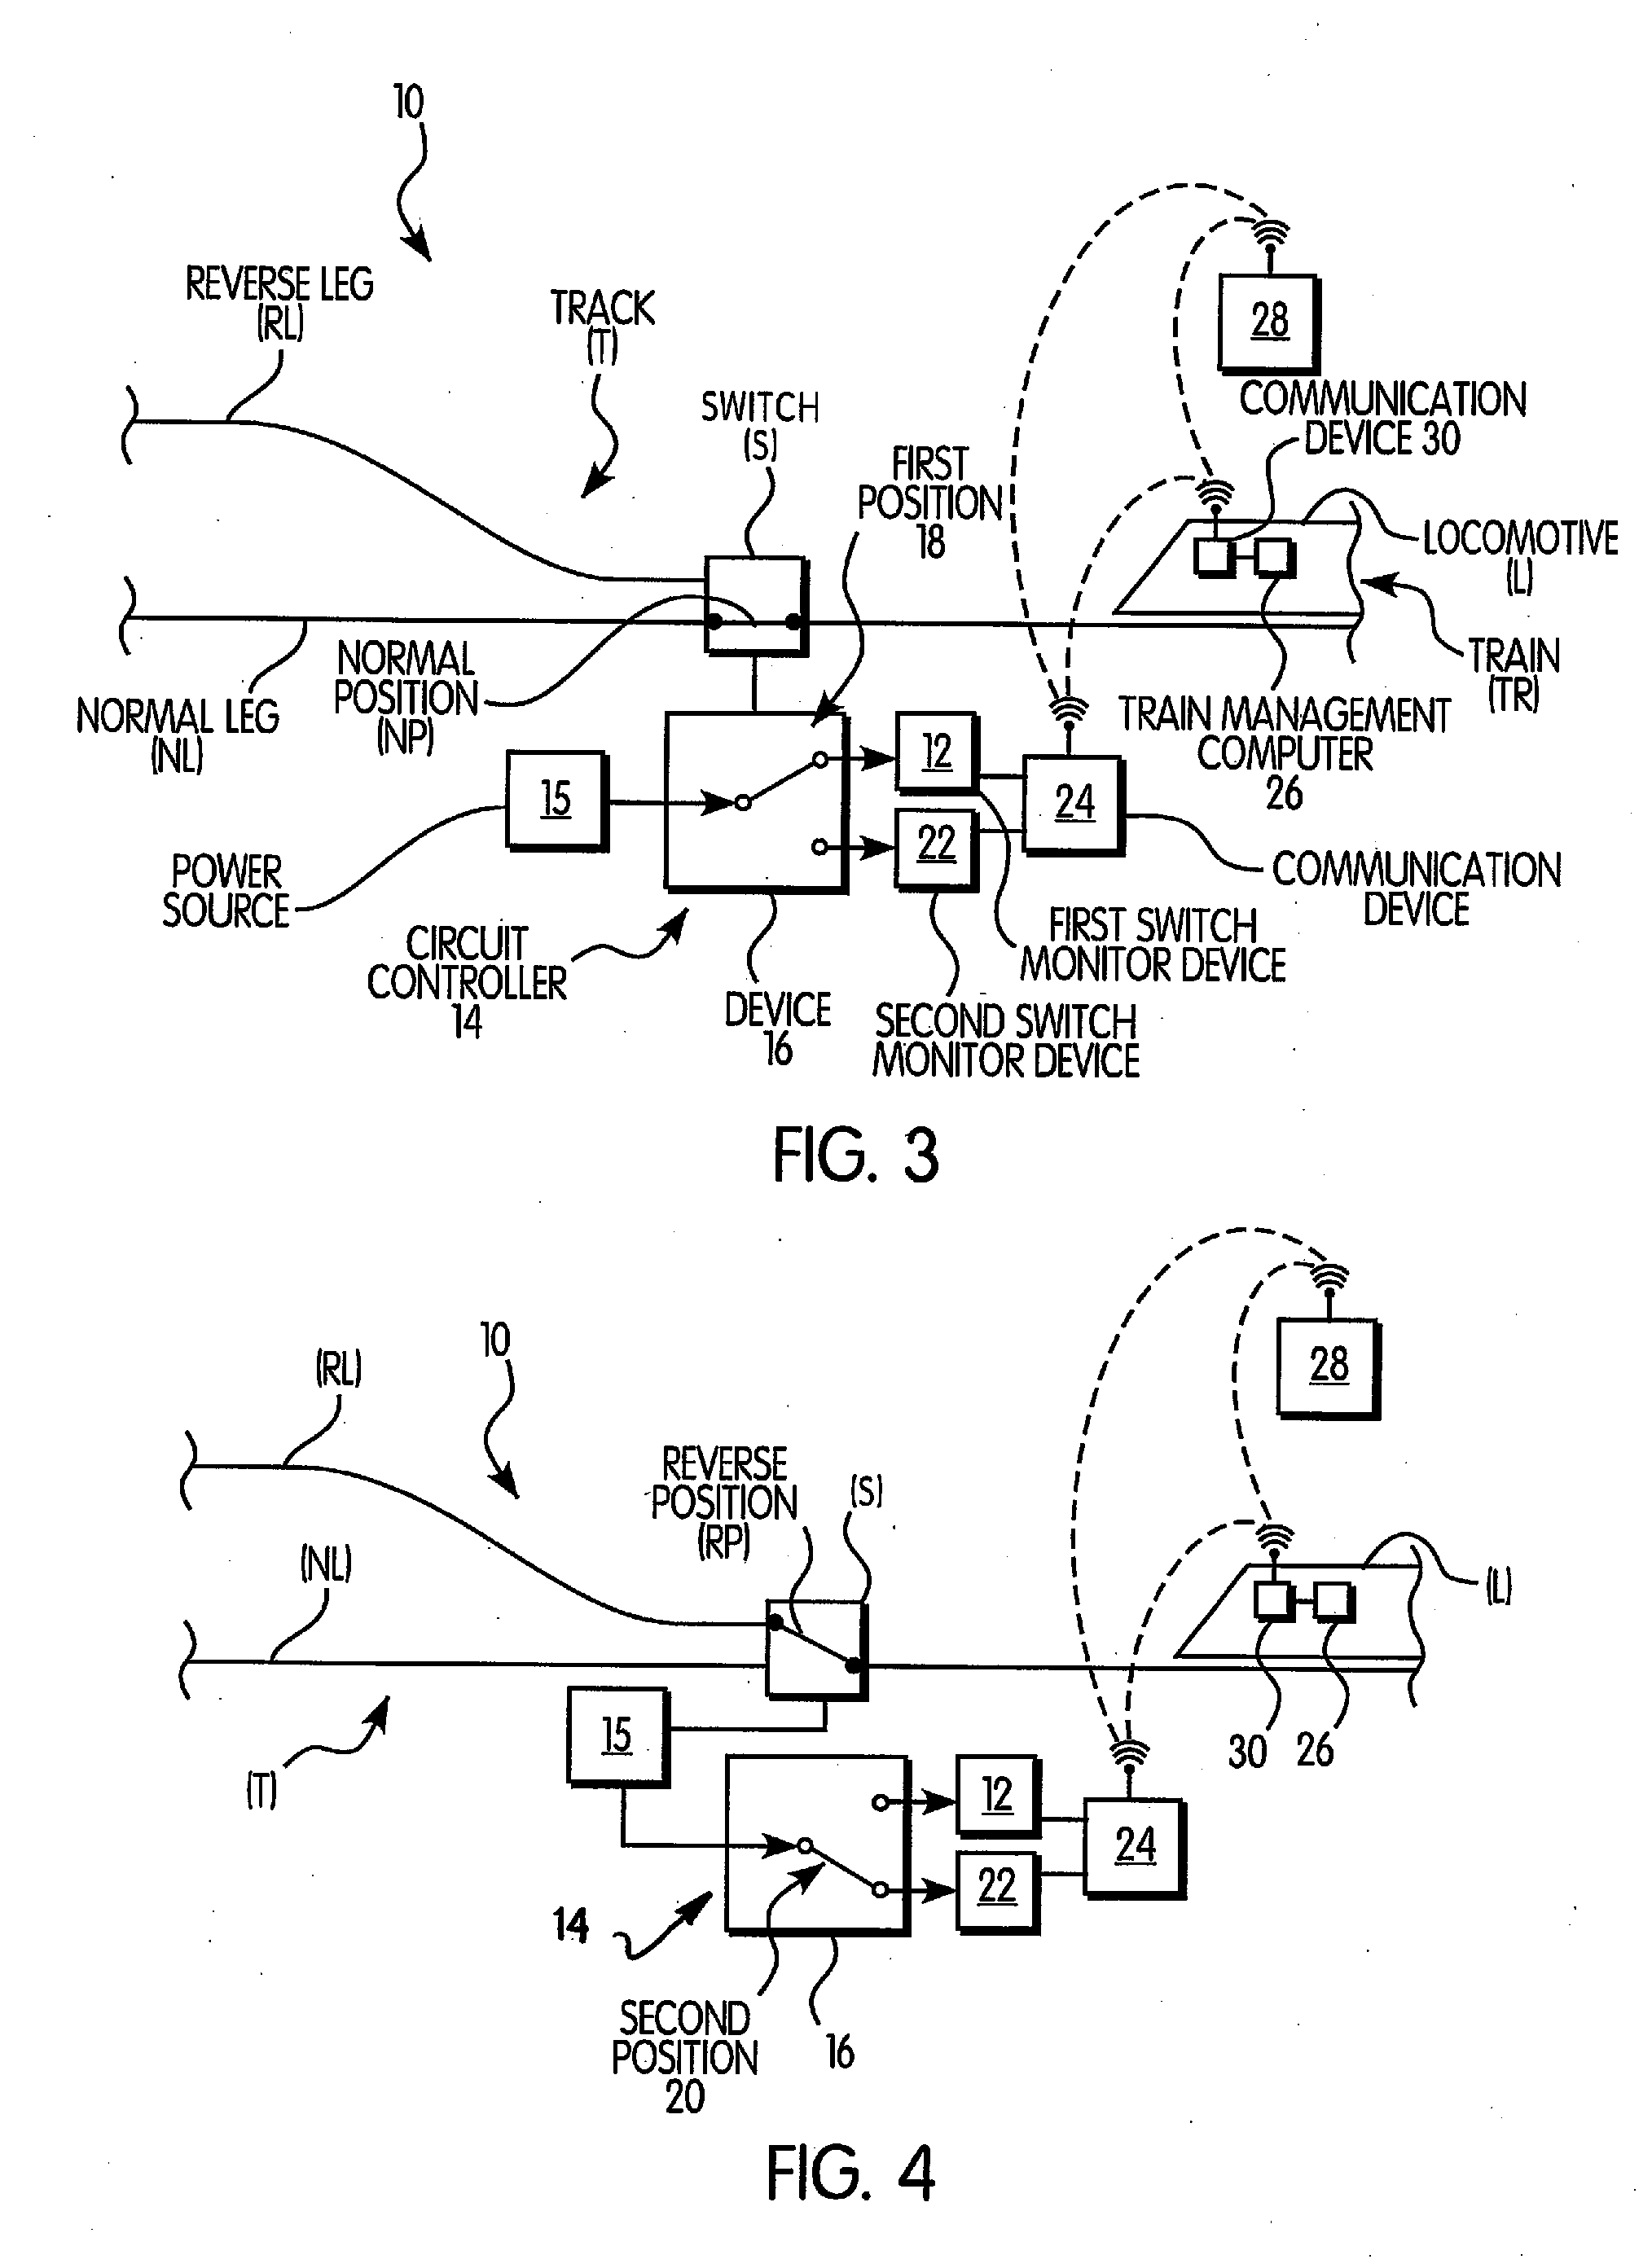 Switch Alignment Detection Enforcement System and Method